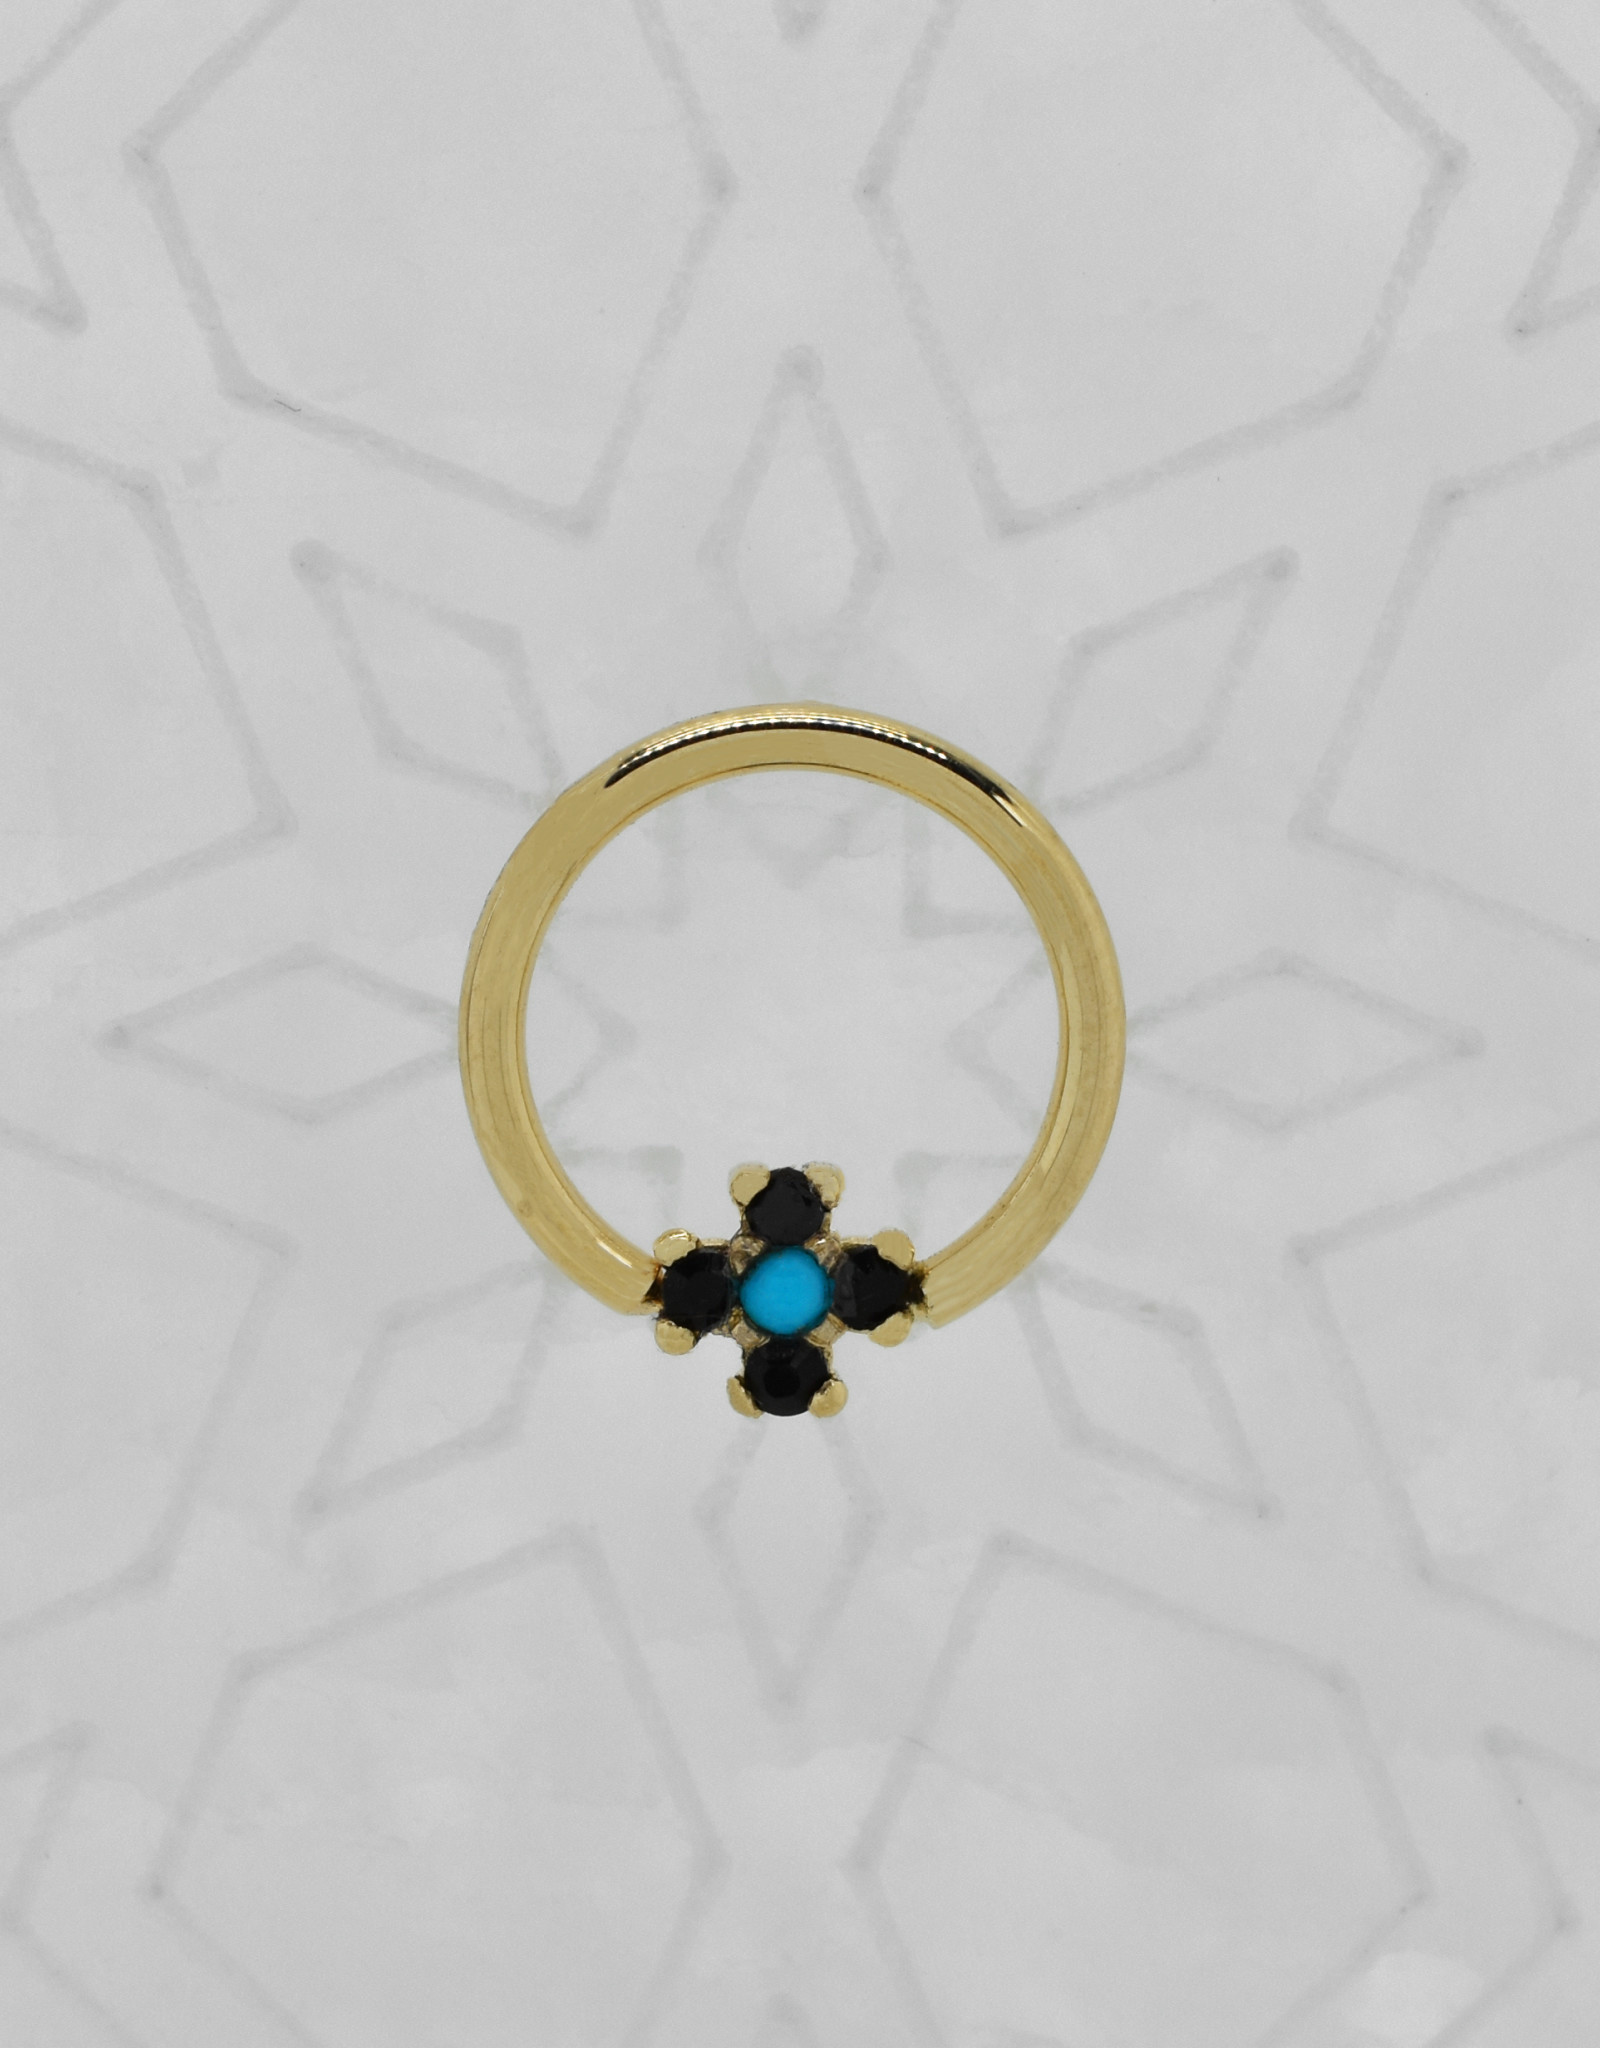 Quetzalli Quetzalli 16g 3/8” Soul ring Obsidian with Turquoise center nipple oriented YG